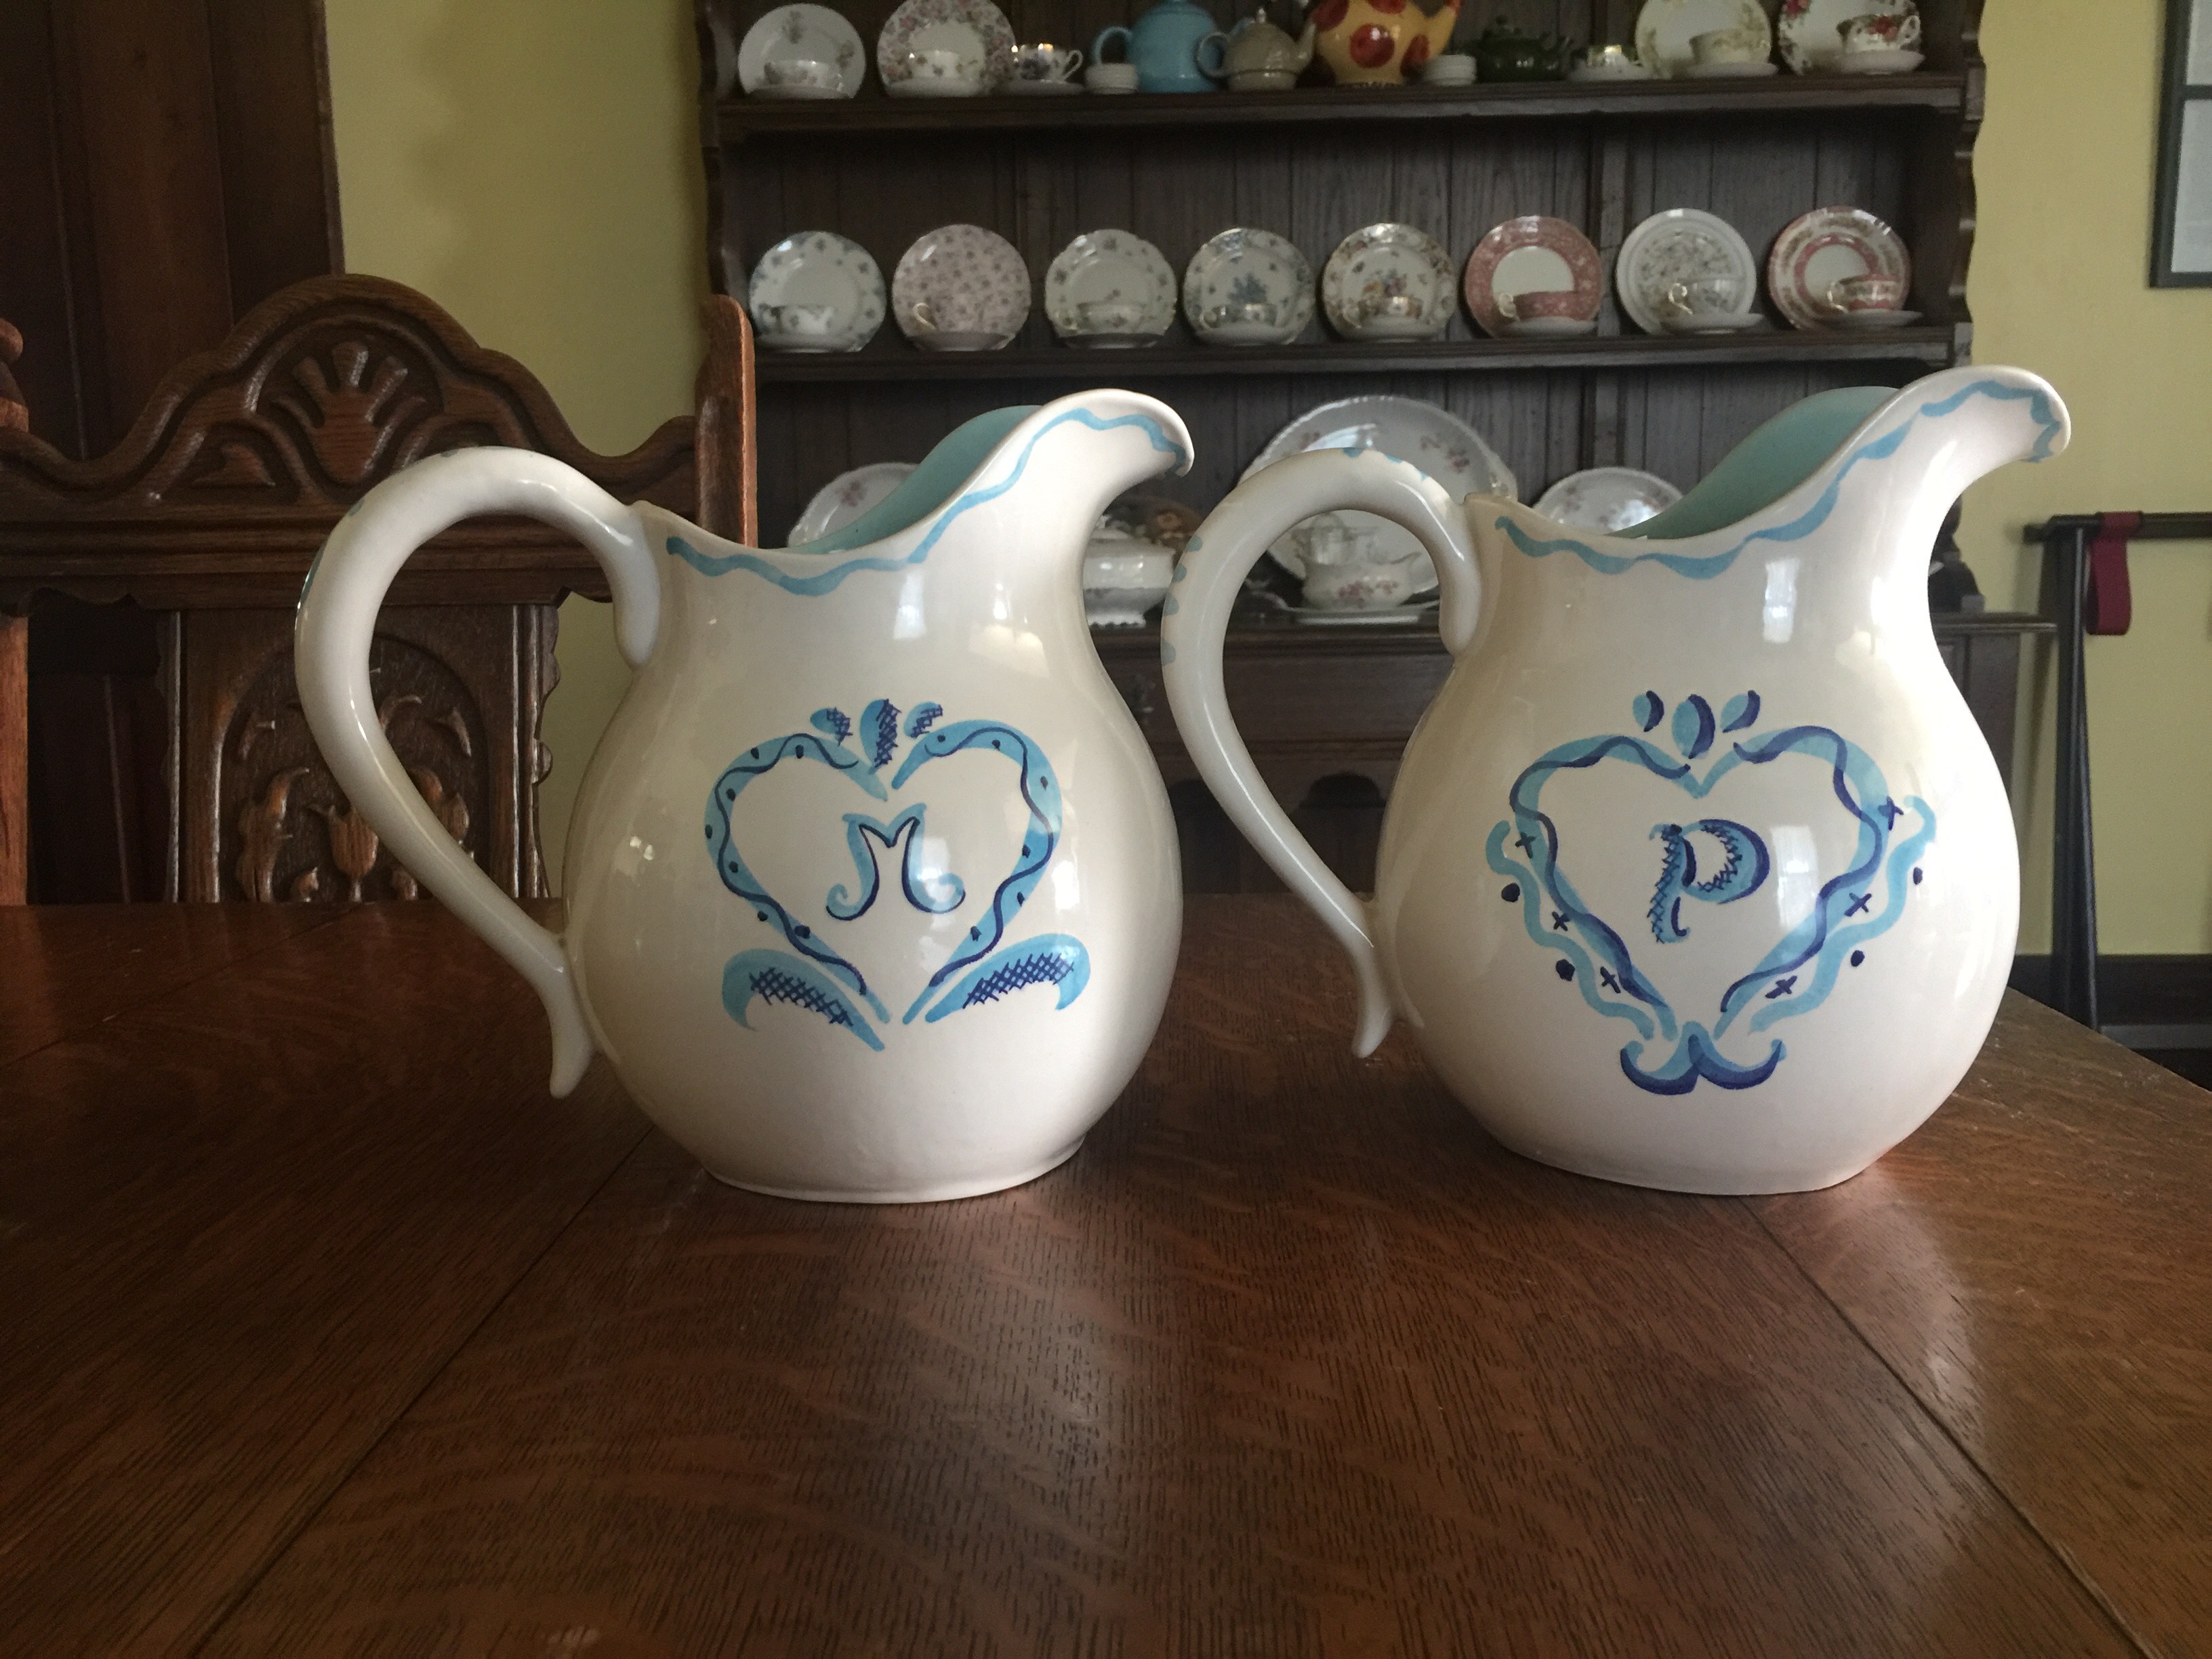 Two of local potter Chanticleer's Wallen Pitchers